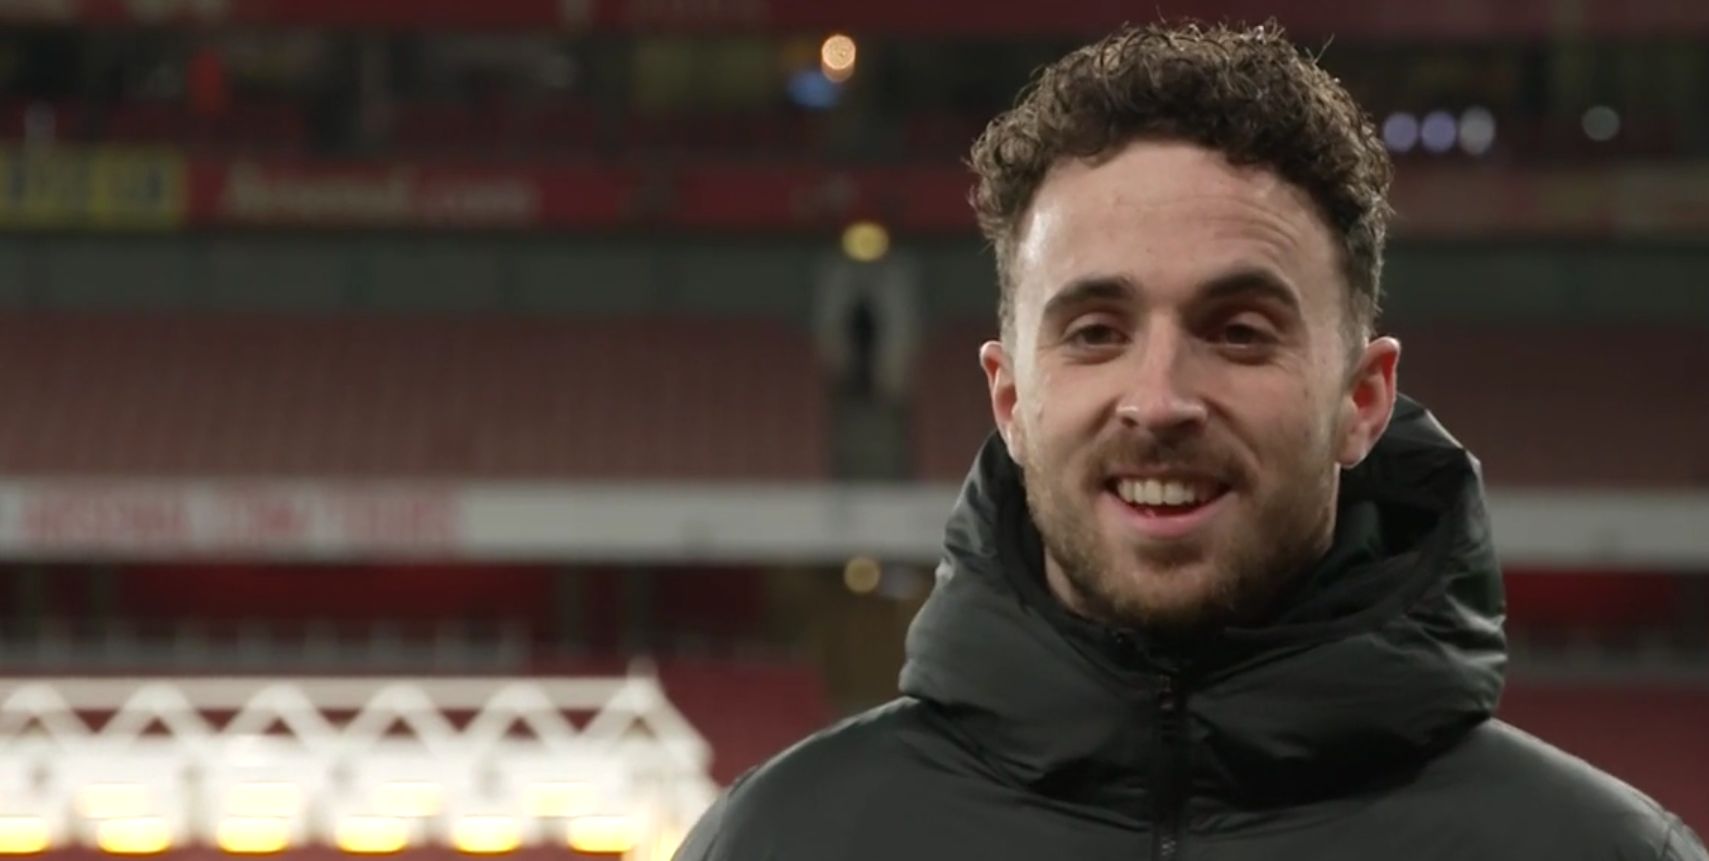 (Video) Diogo Jota on VAR ‘killing the joy of the moment’ to properly celebrate scoring his second and match-clinching goal